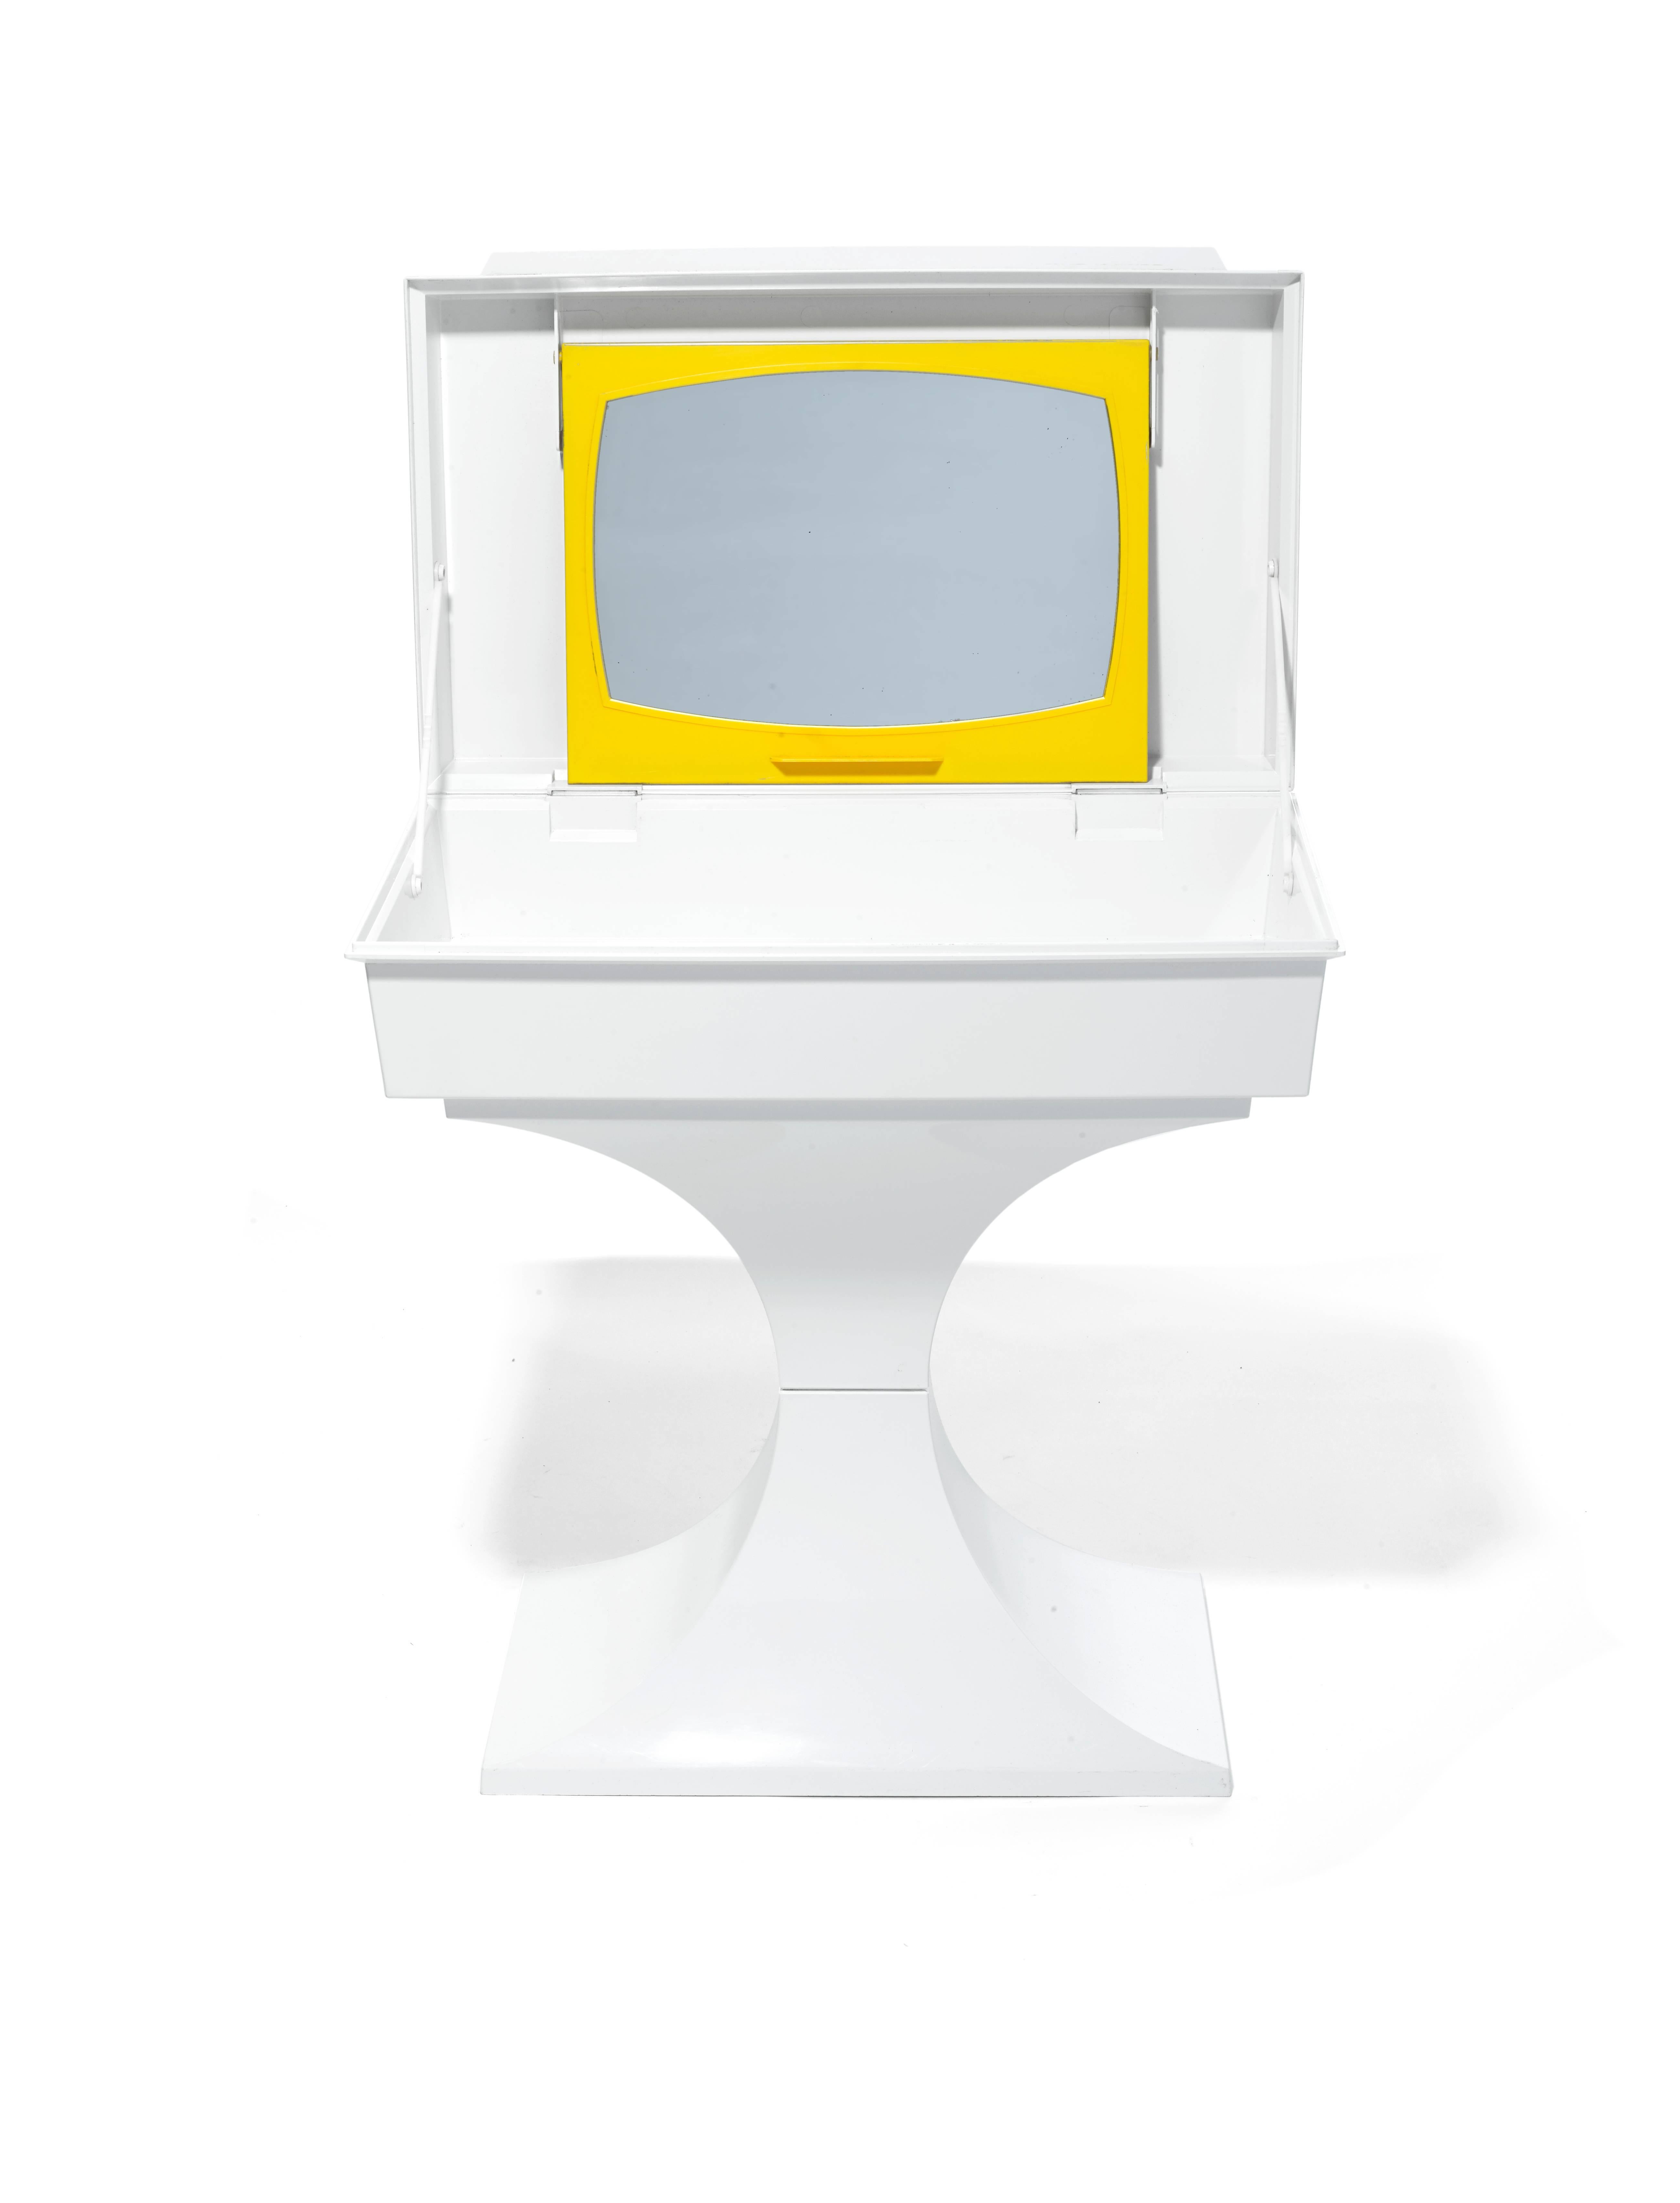 "POP" Child Vanity or Desk in White and Yellow Plastic with Mirror, 1970s

1970s
White and Yellow Plastic, Mirror Glass
H 26 in, D 13.5 in, W 23.25 in